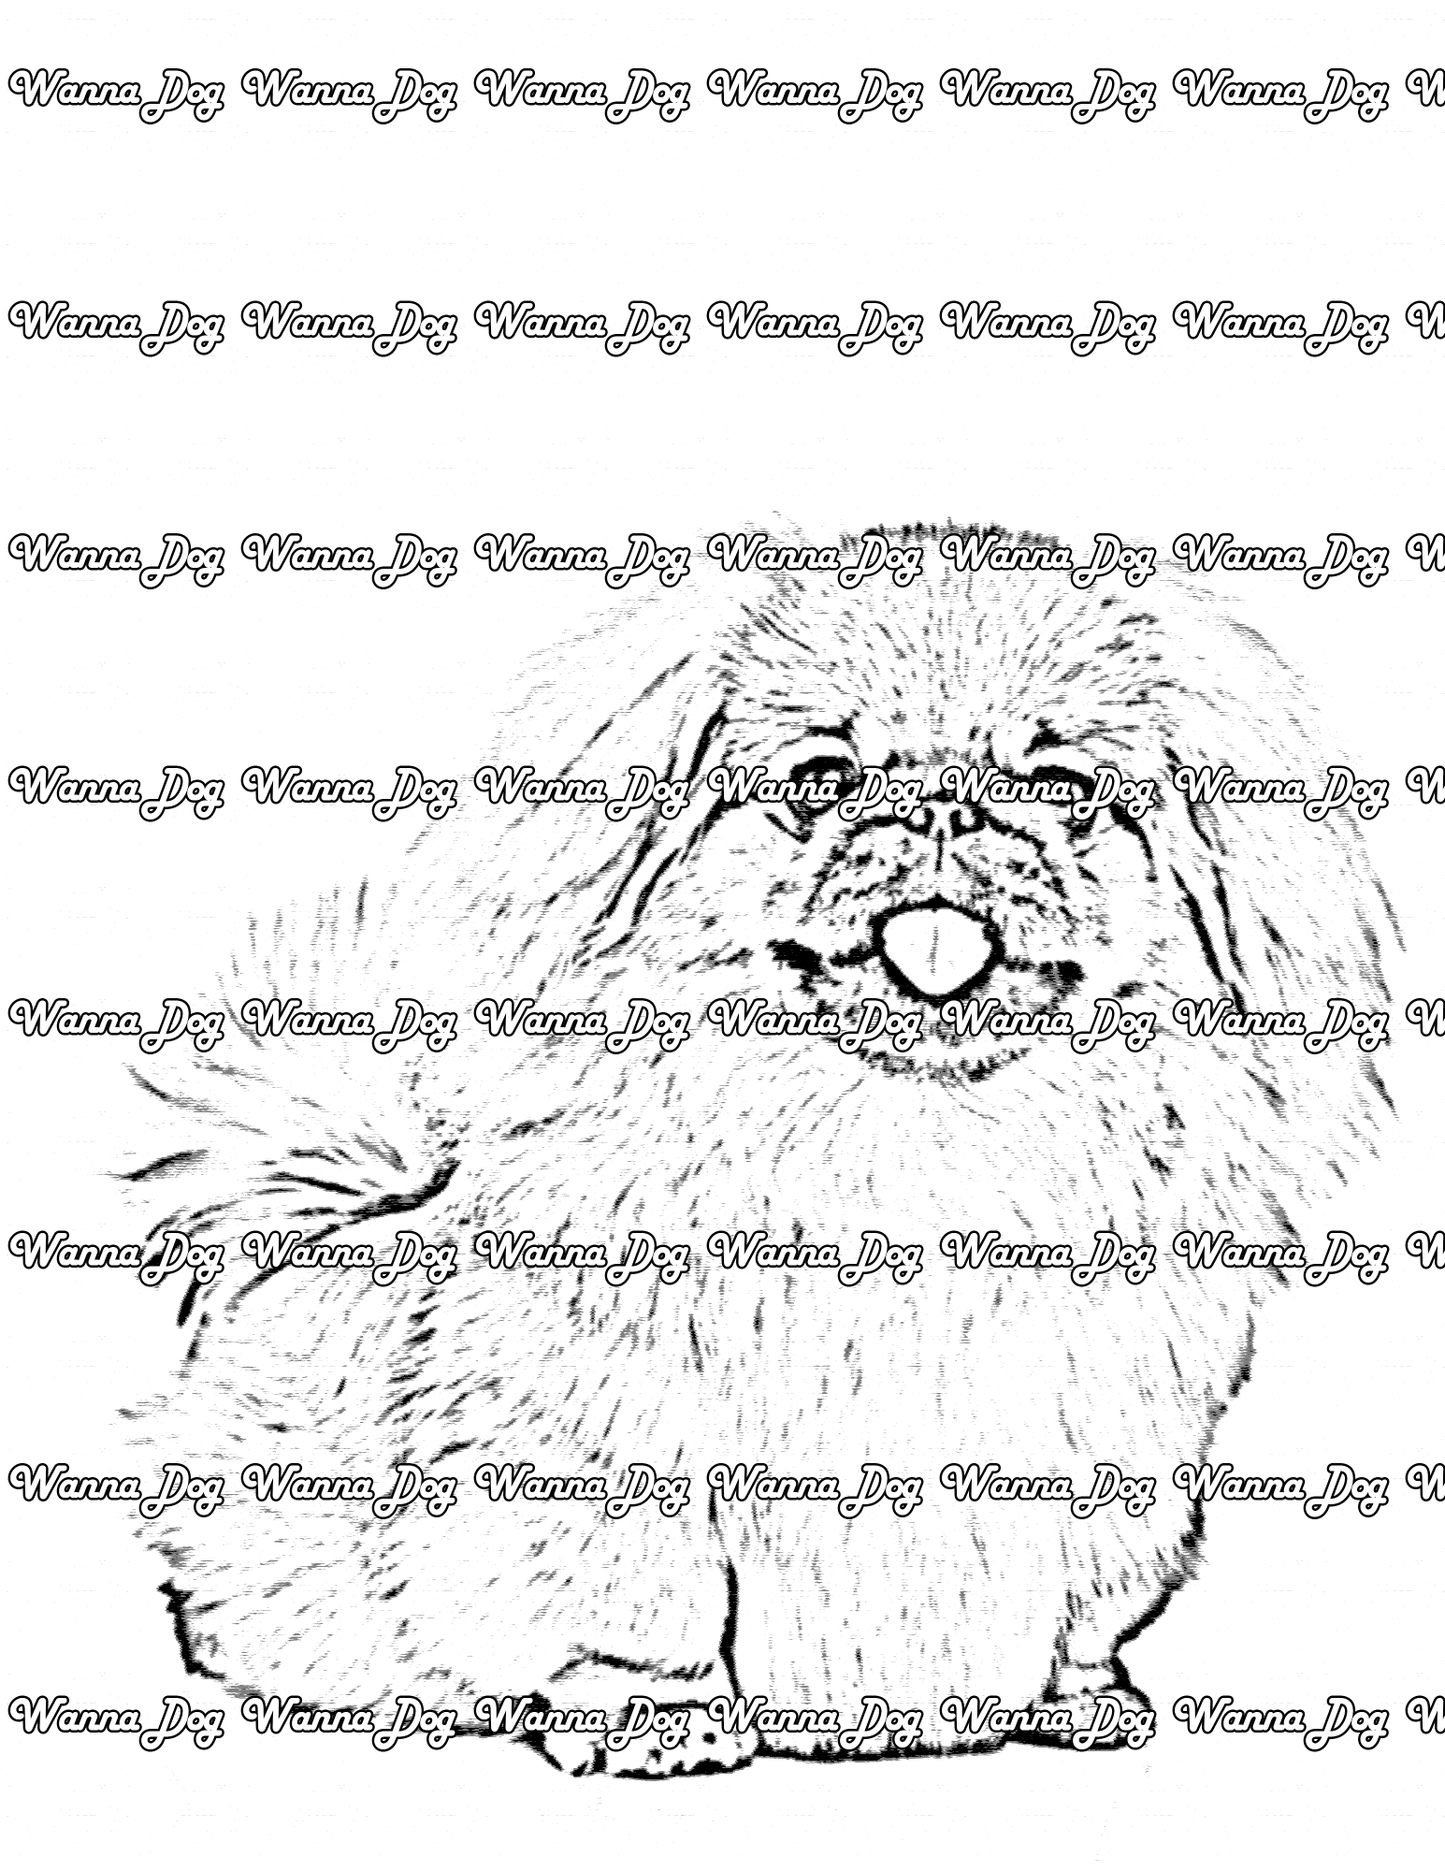 Pekingese Coloring Page of a Pekingese posing, sitting, with their tongue out